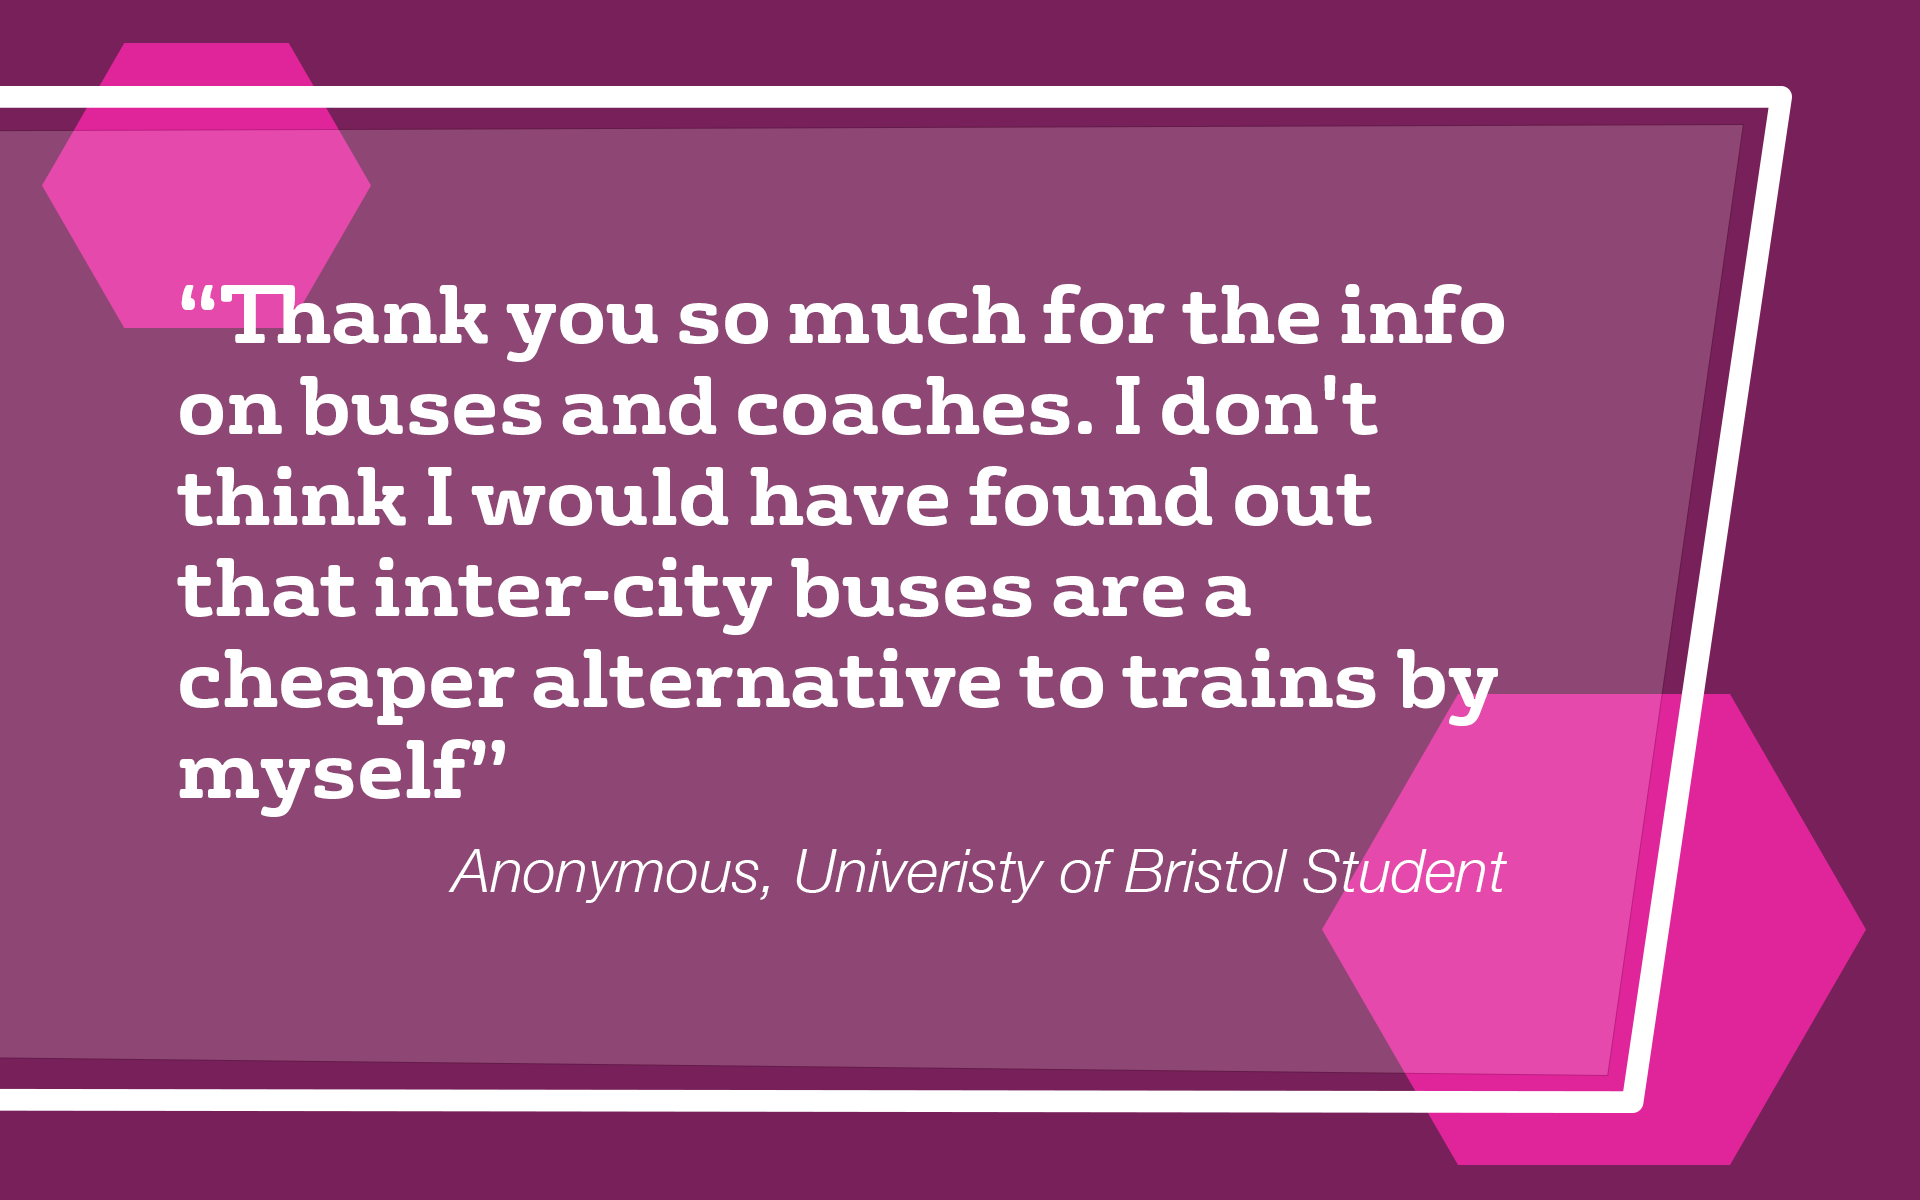 Quote from an anonymous University of Bristol student